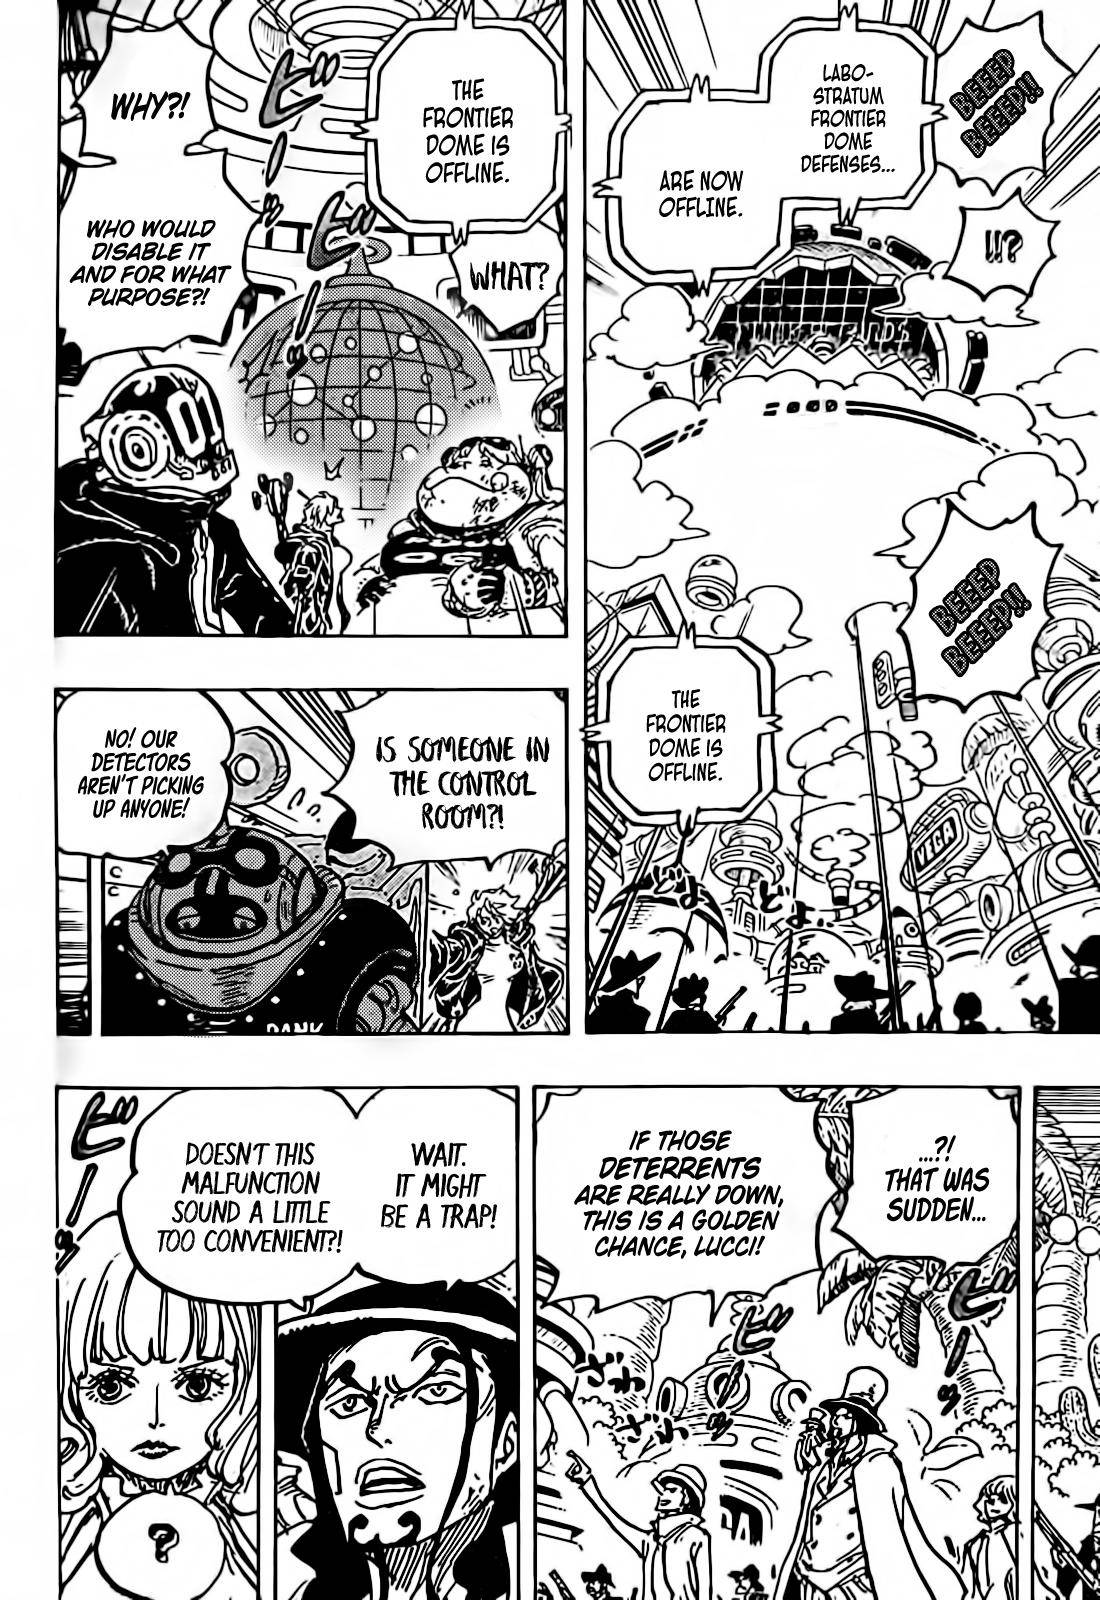 Read One Piece Chapter 1071 6